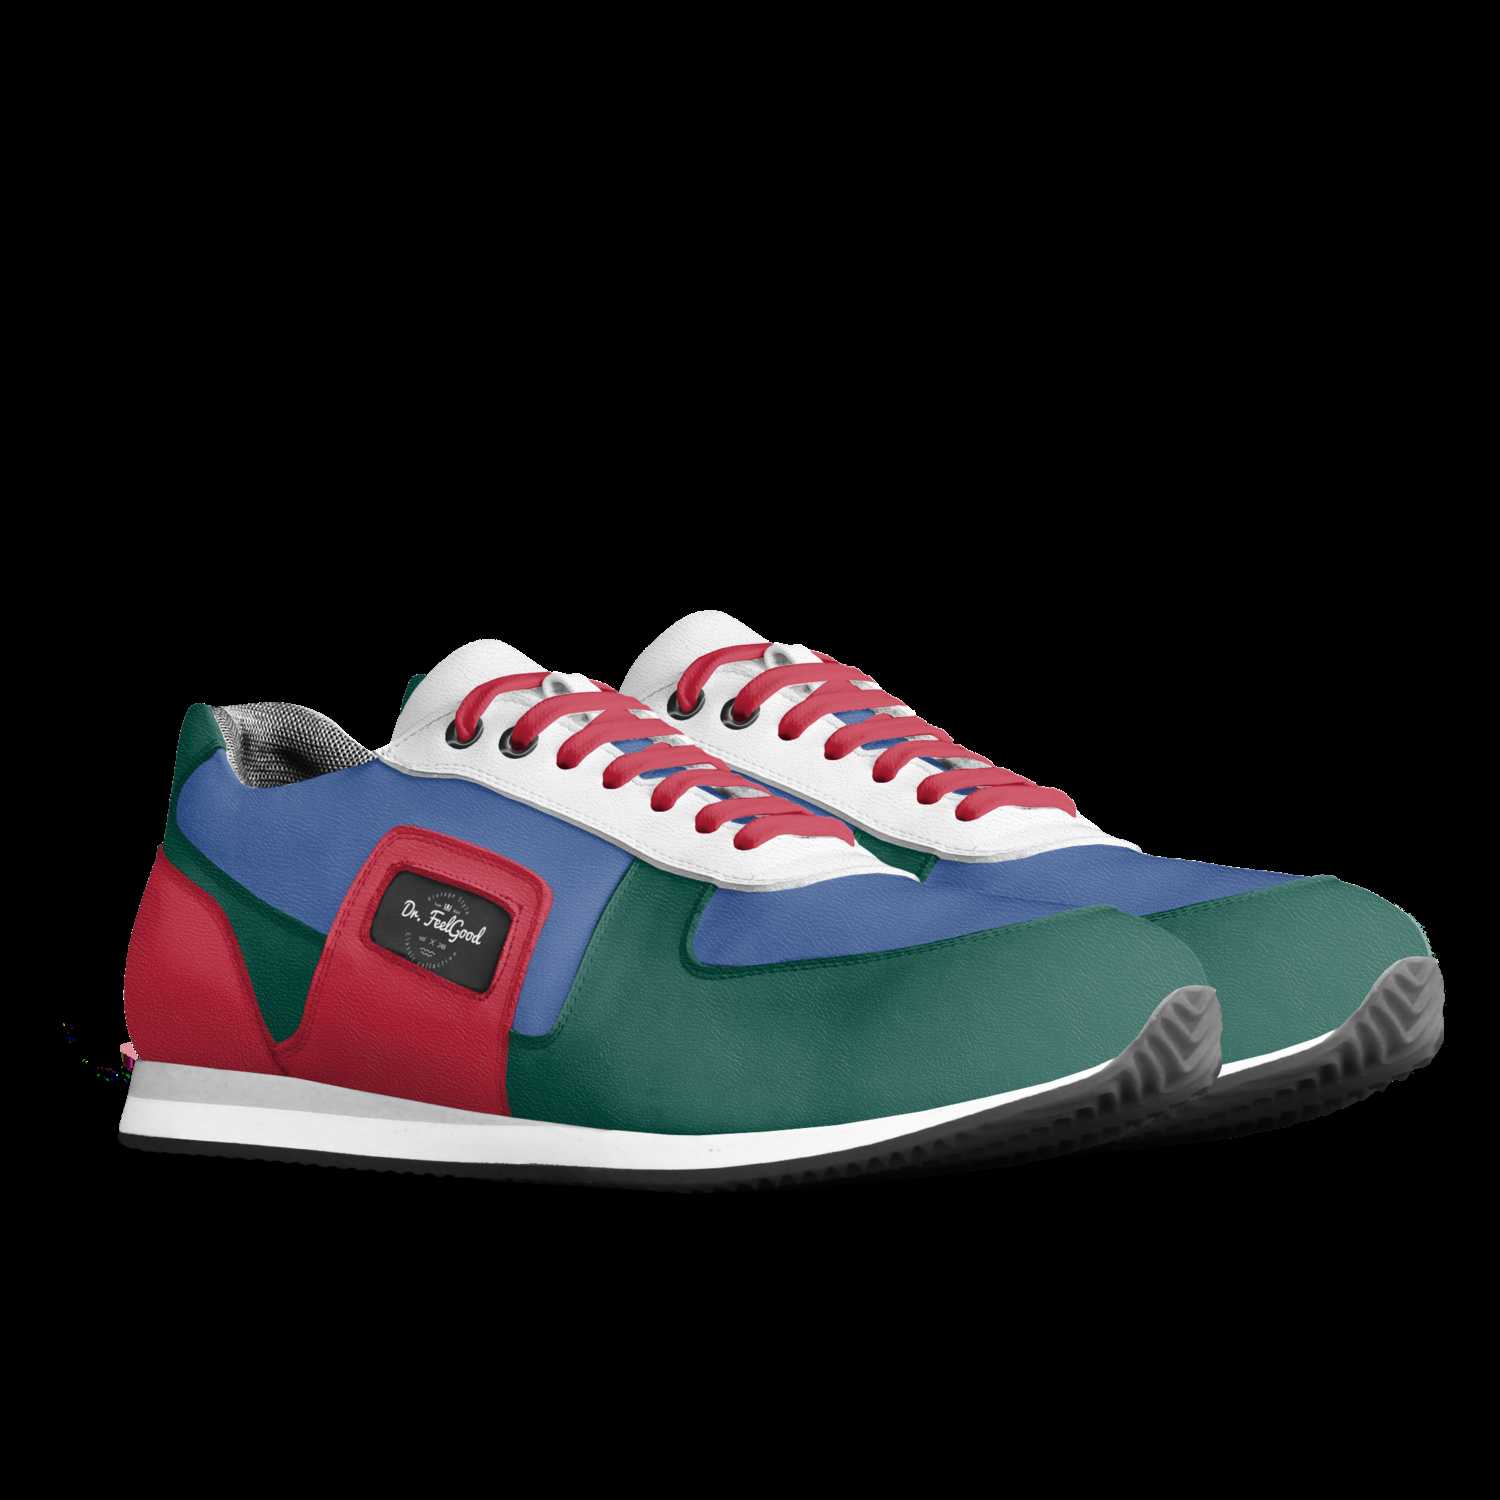 Dr. FeelGood | A Custom Shoe concept by 